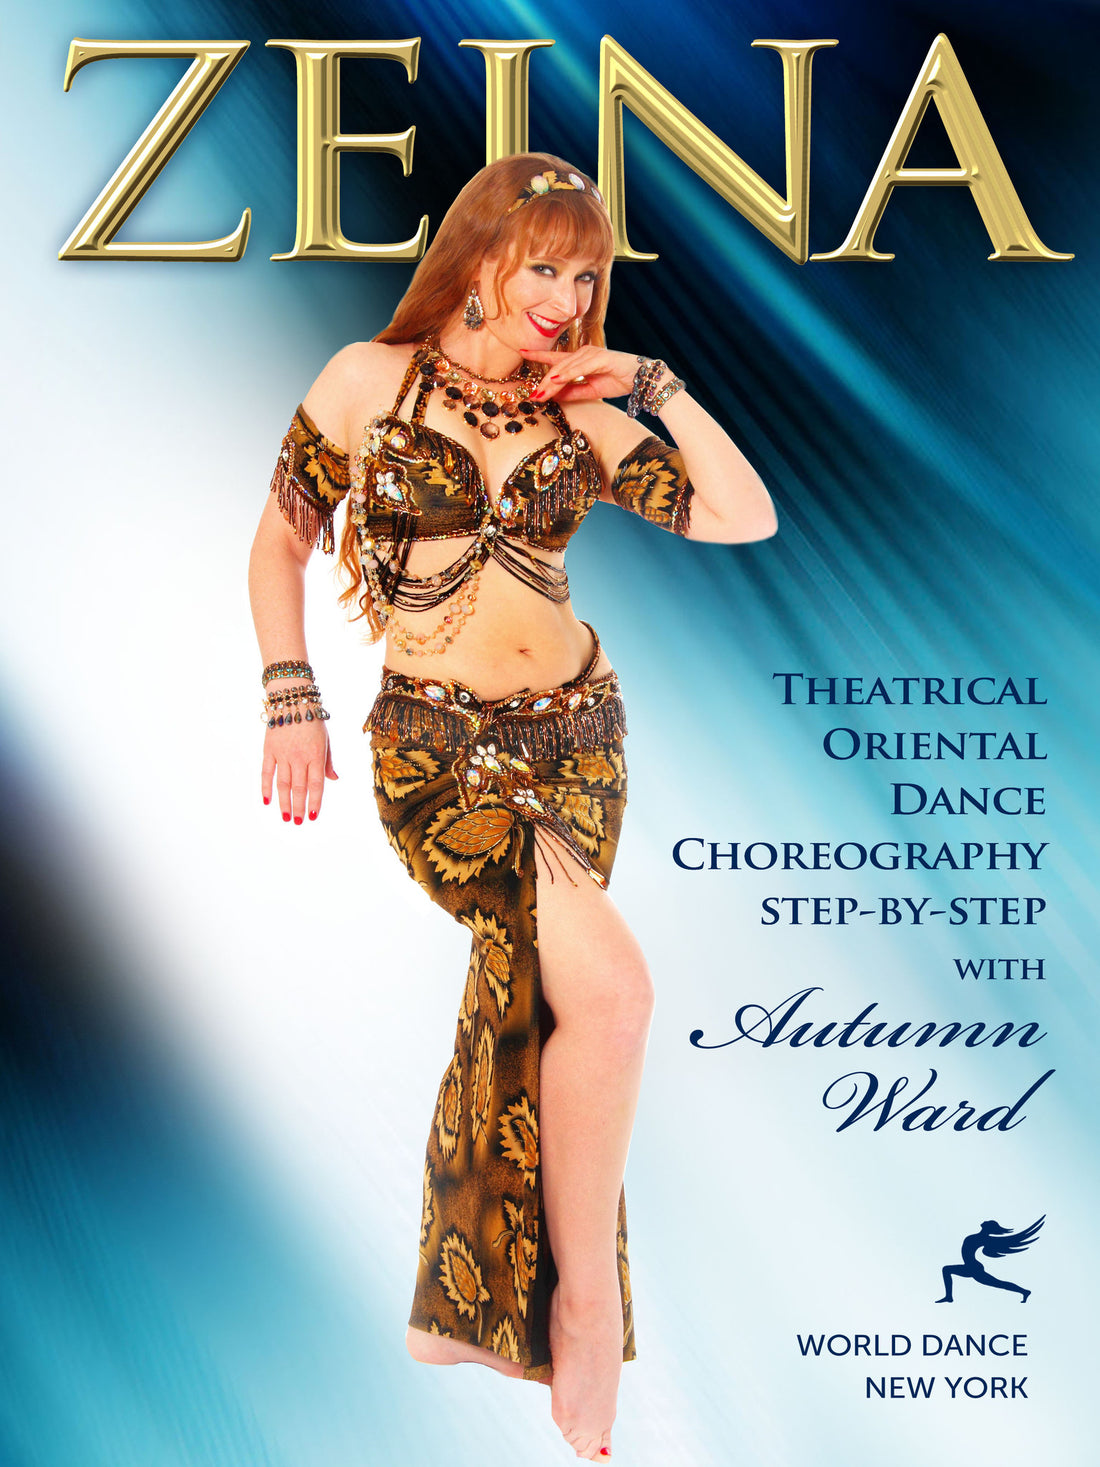 Choreography Studio - belly dance & Flamenco routines for performance - instant video classes / courses